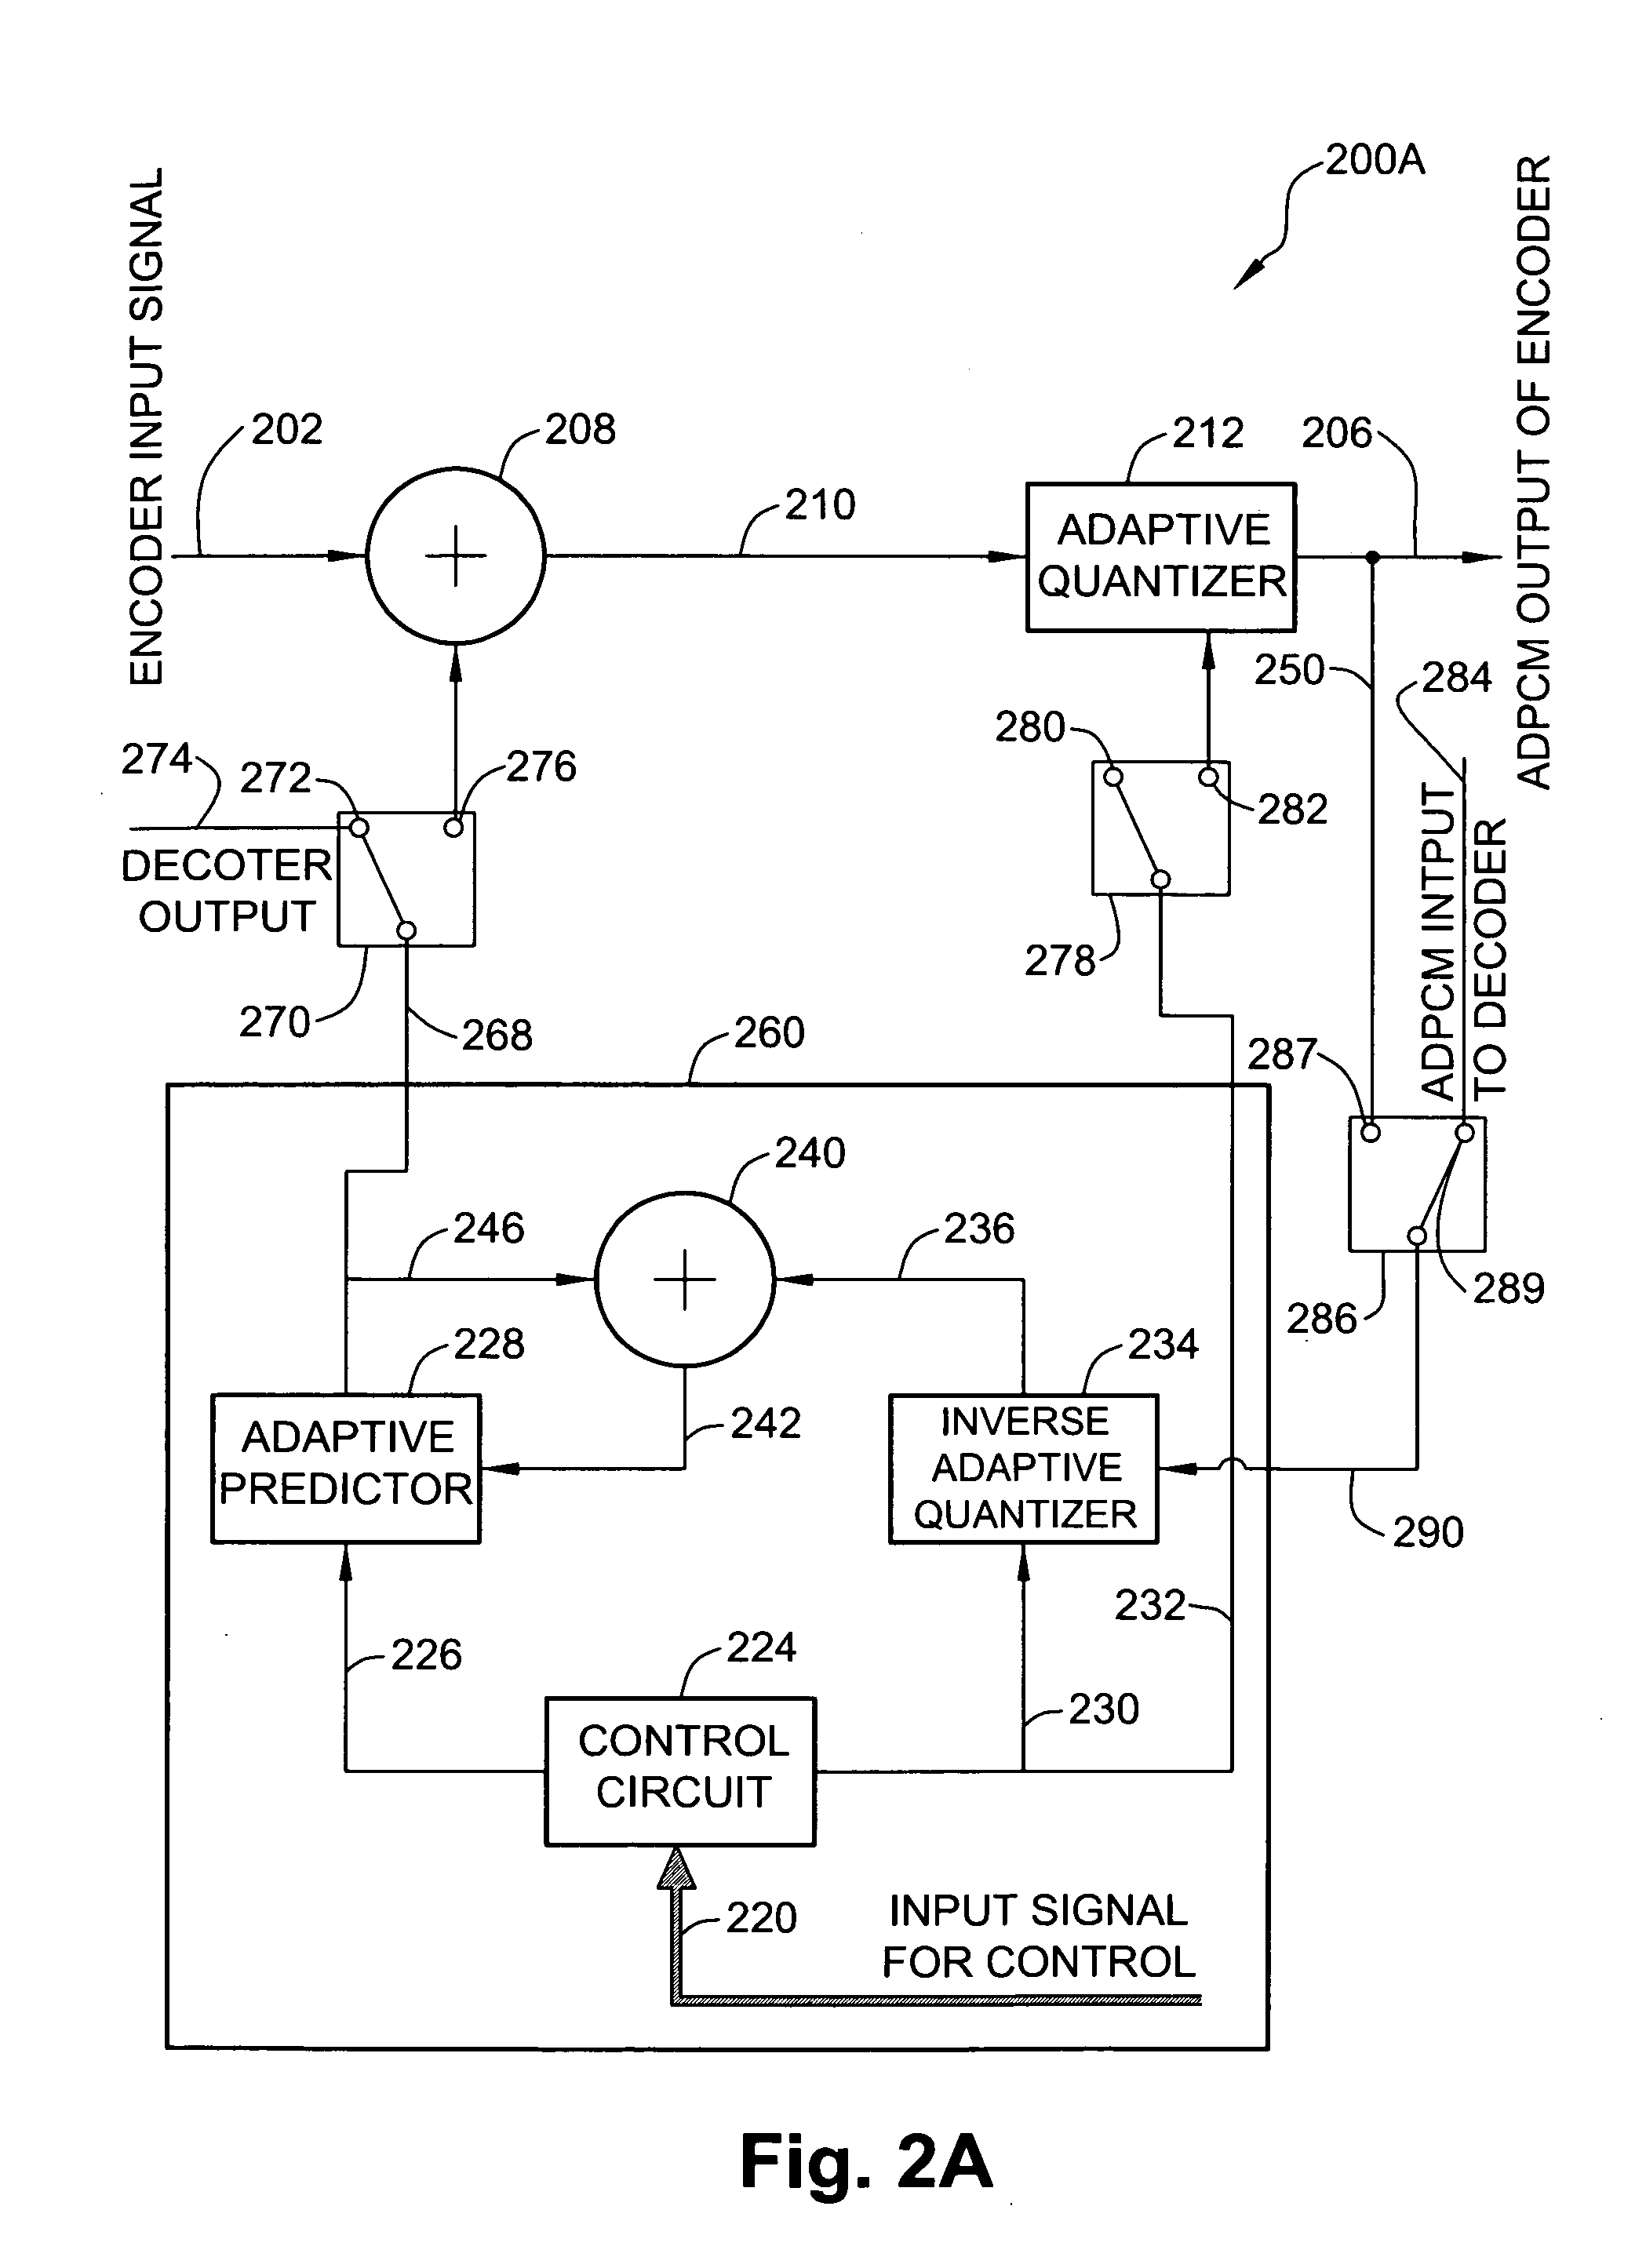 Method and apparatus for smooth convergence during audio discontinuous transmission